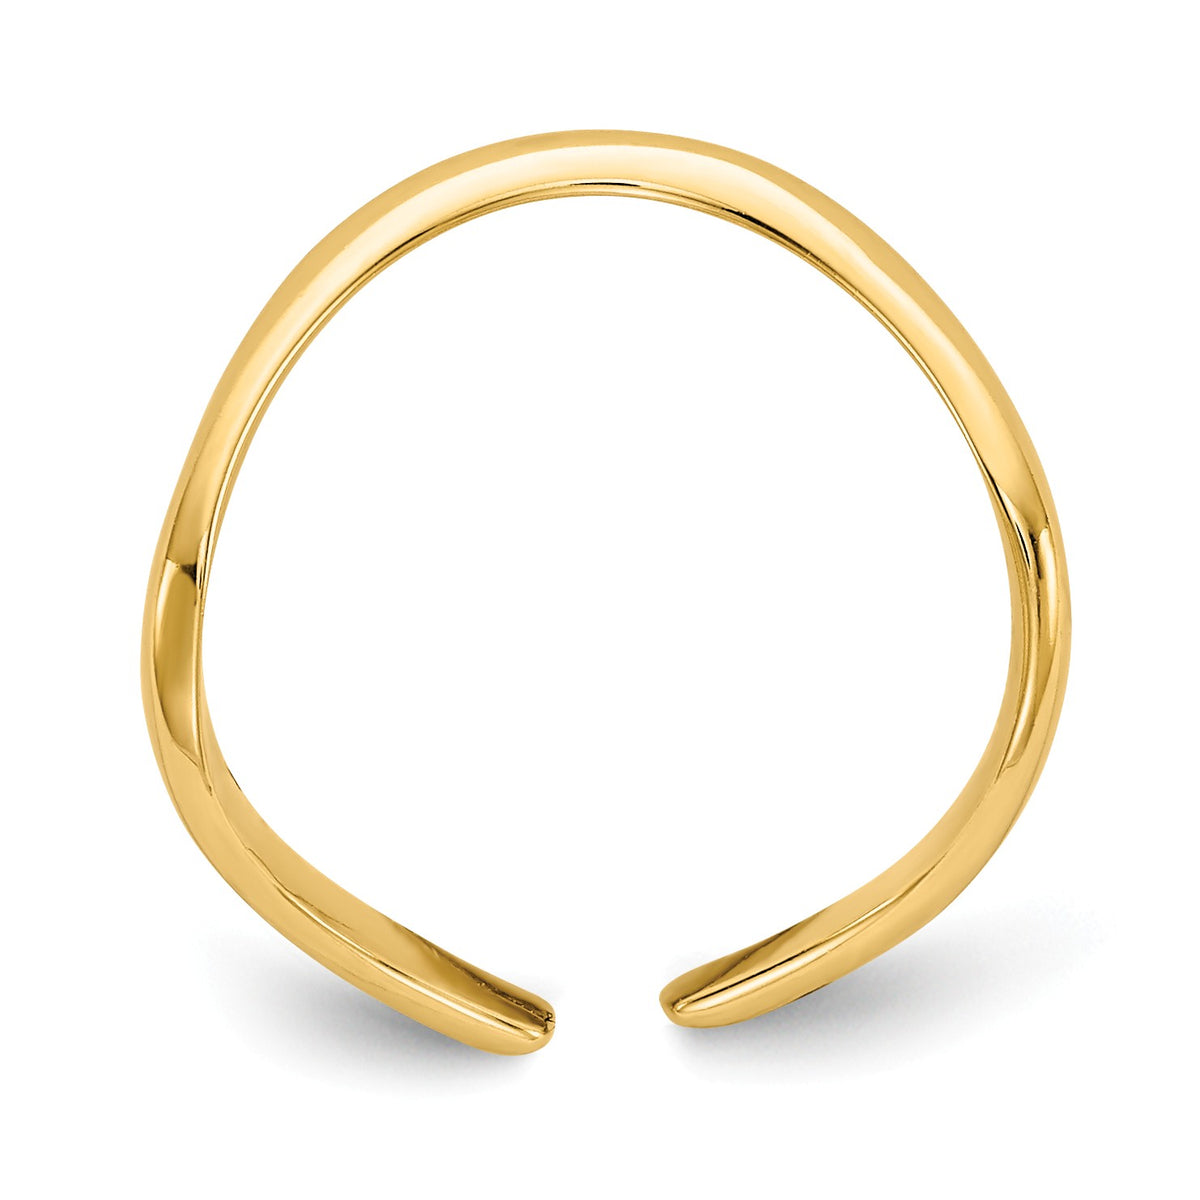 Alternate view of the Polished Curved Toe Ring in 14K Yellow Gold by The Black Bow Jewelry Co.